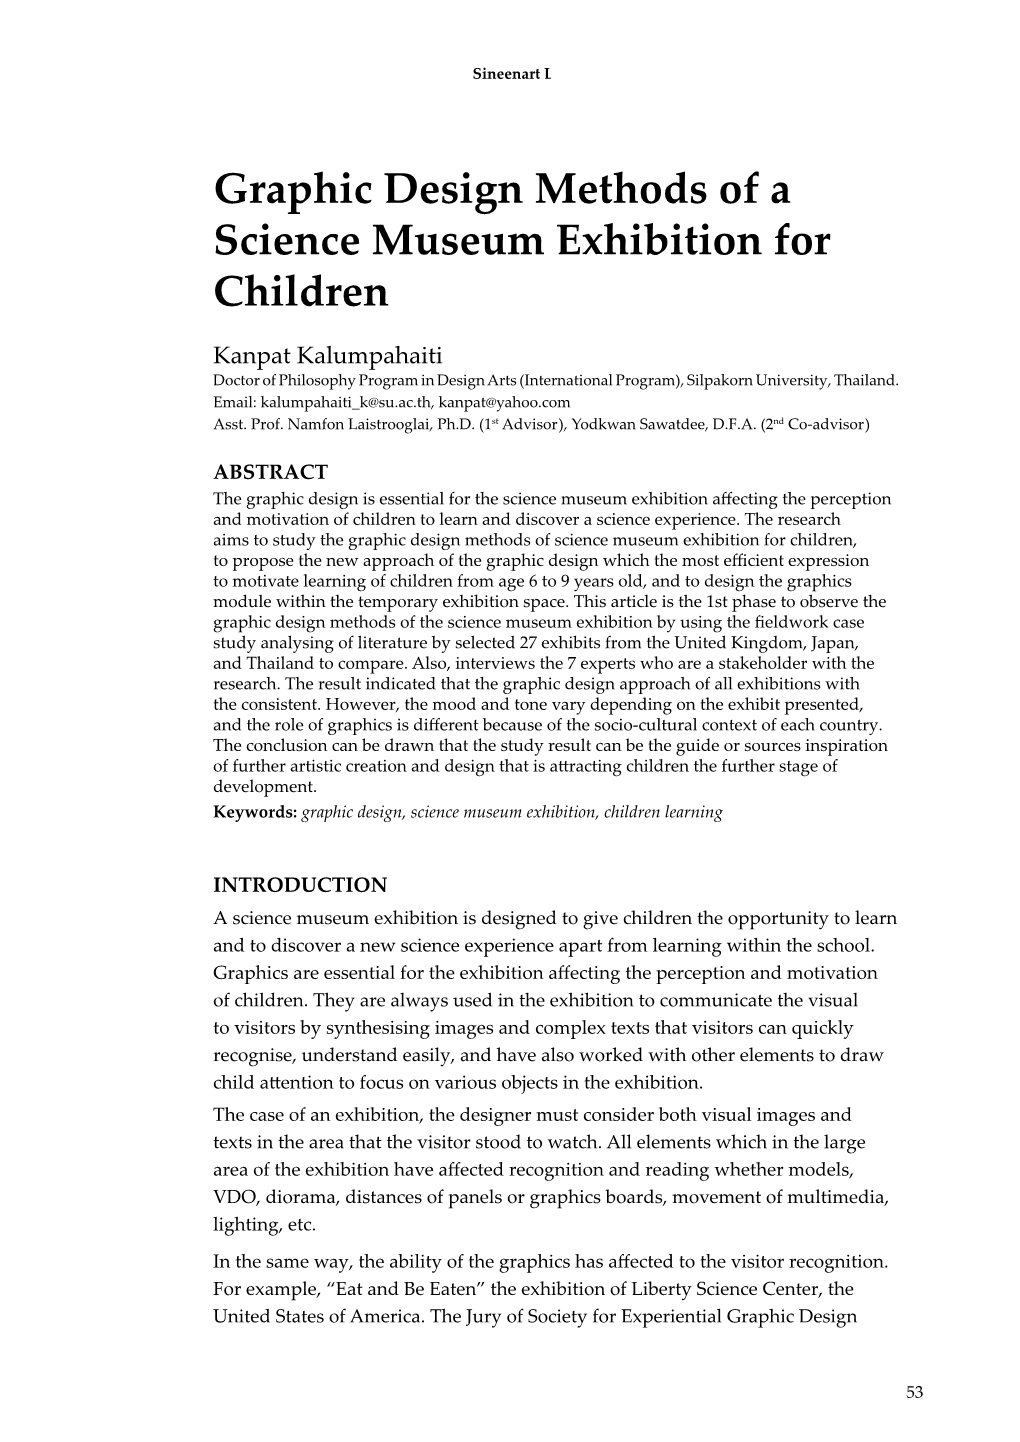 Graphic Design Methods of a Science Museum Exhibition for Children